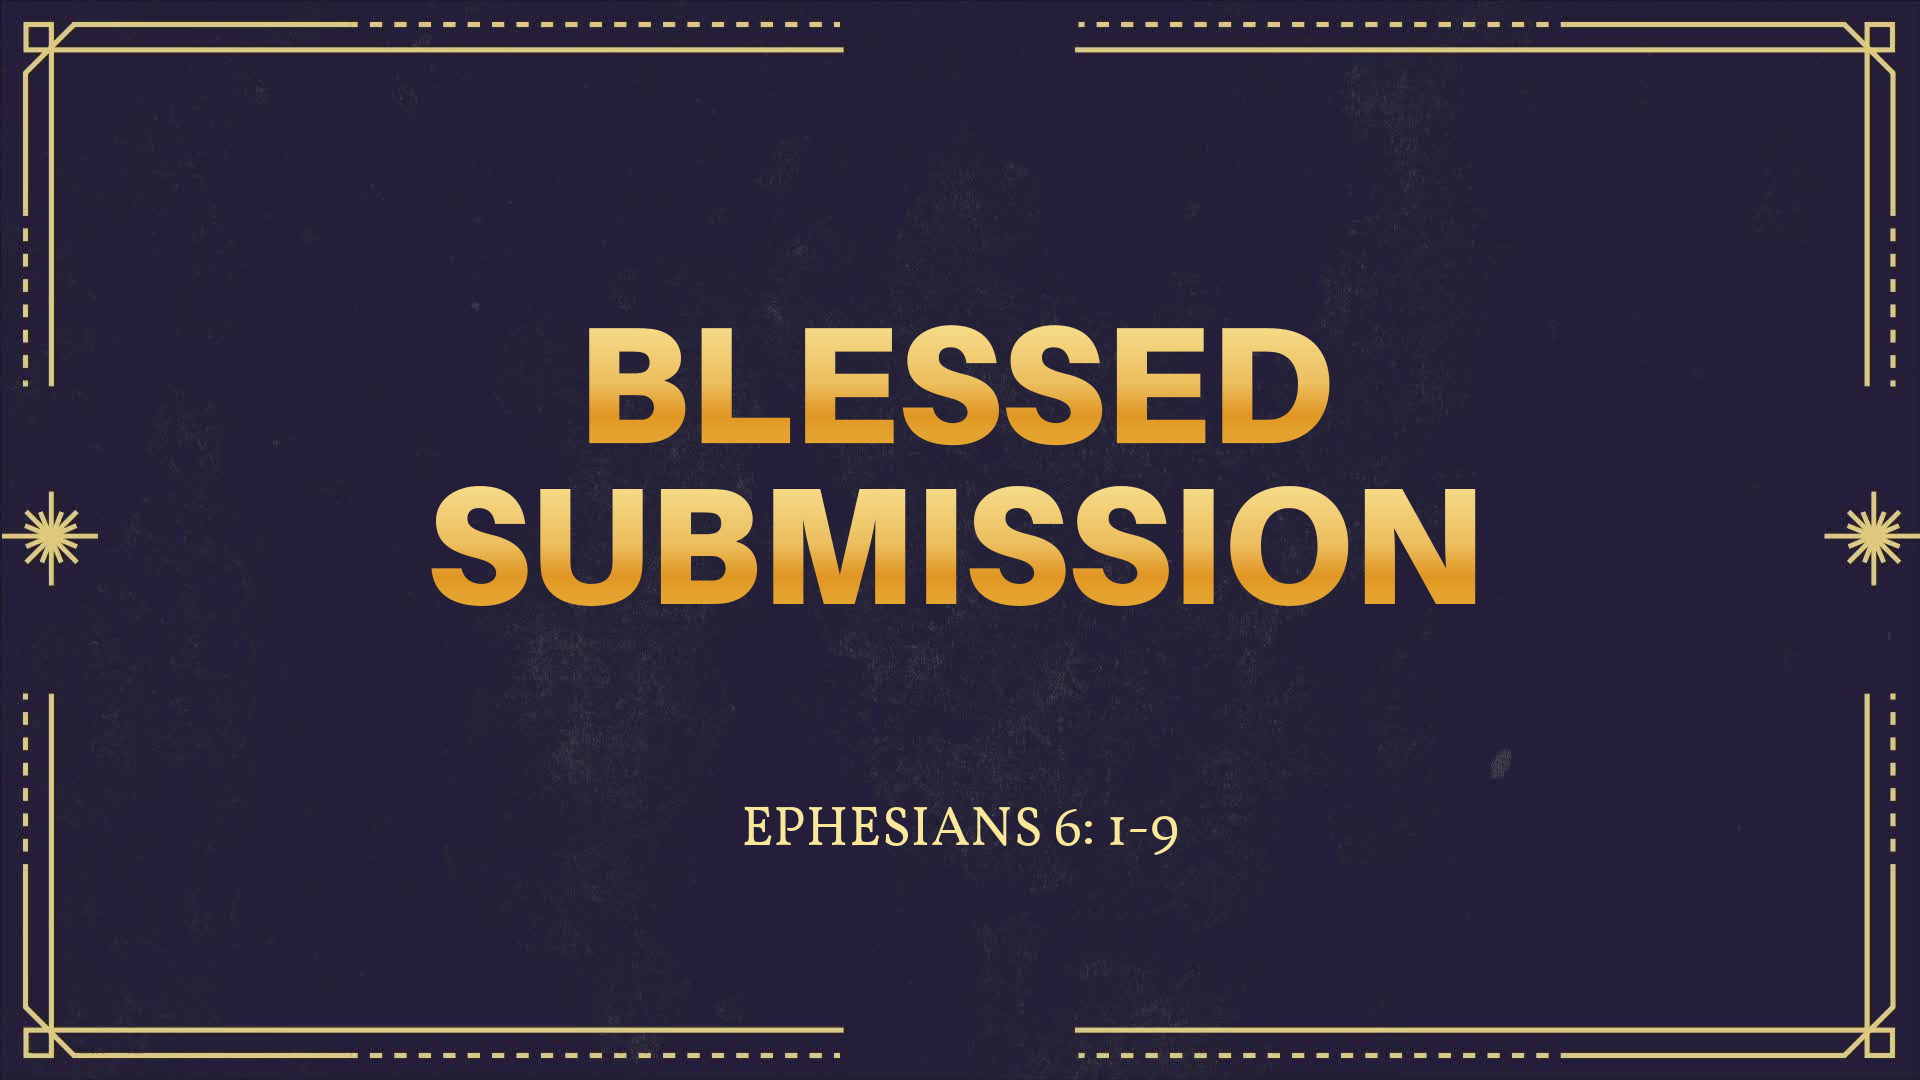 Oct 3, 2021 - Blessed Submission (Video) - Ephesians 6: 1-9